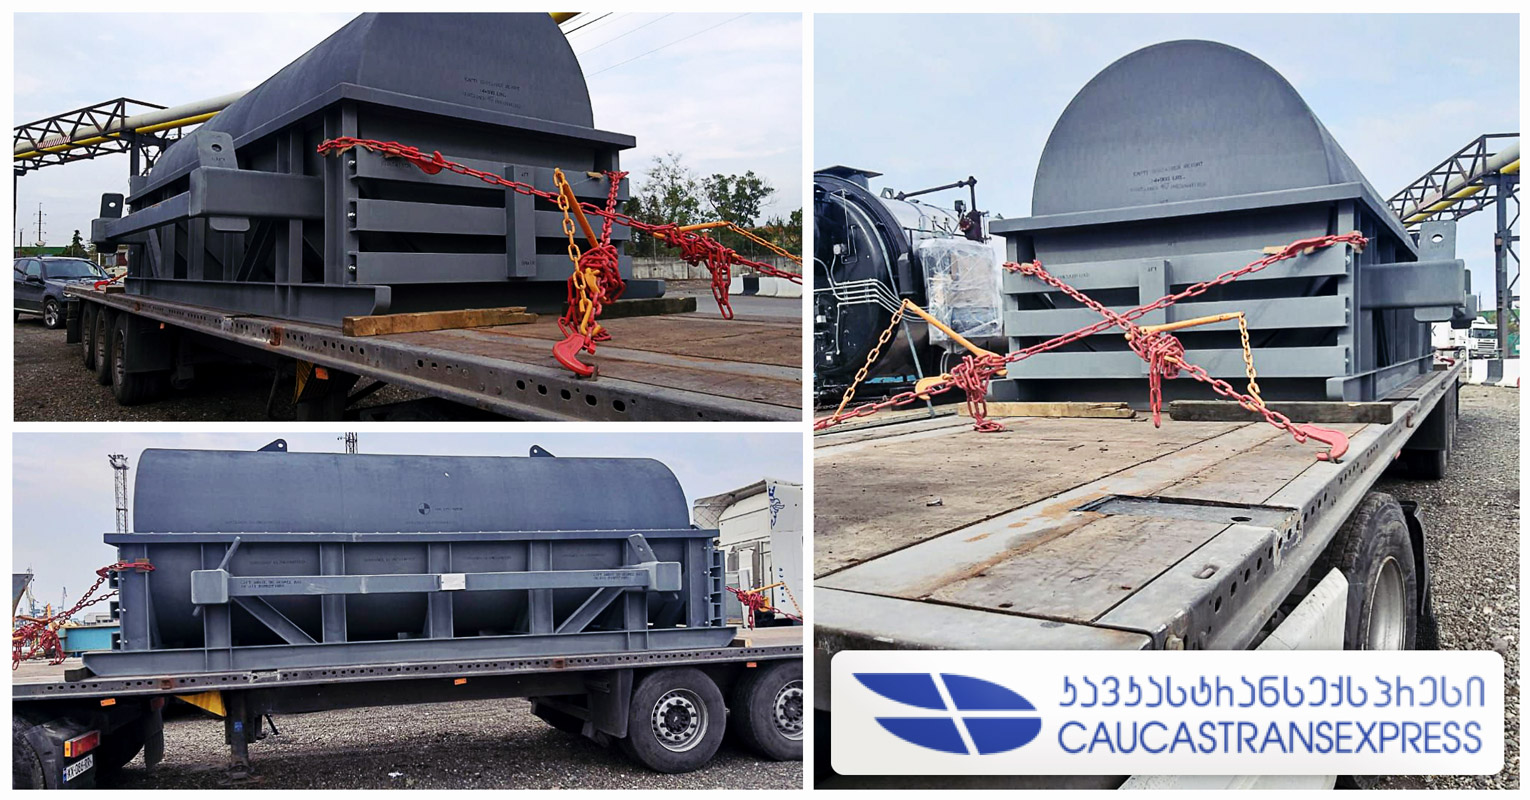 Caucastransexpress Handled Some Out Of Gauge Cargo for Turkmen Energo State Power Corporation from Poti to Ashgabat